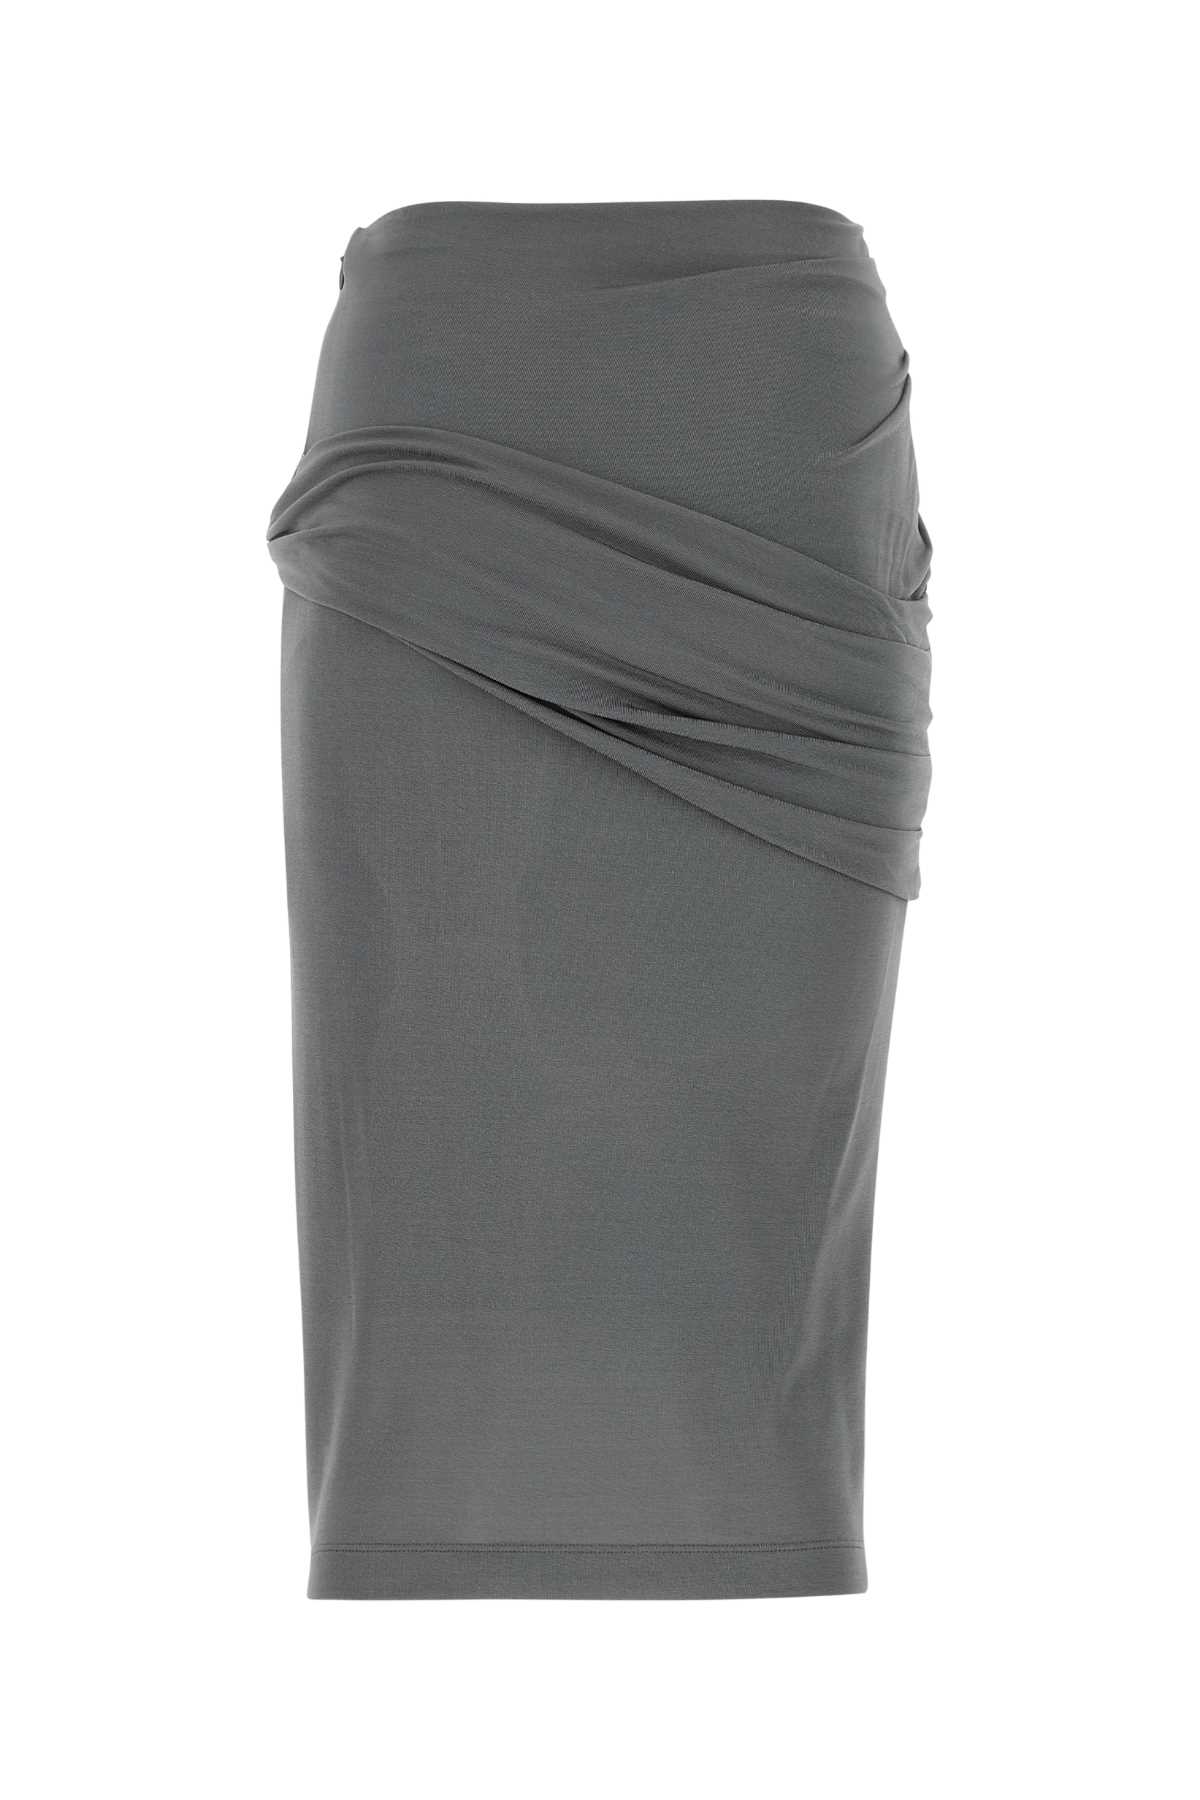 Givenchy Grey Crepe Skirt In Darkgrey